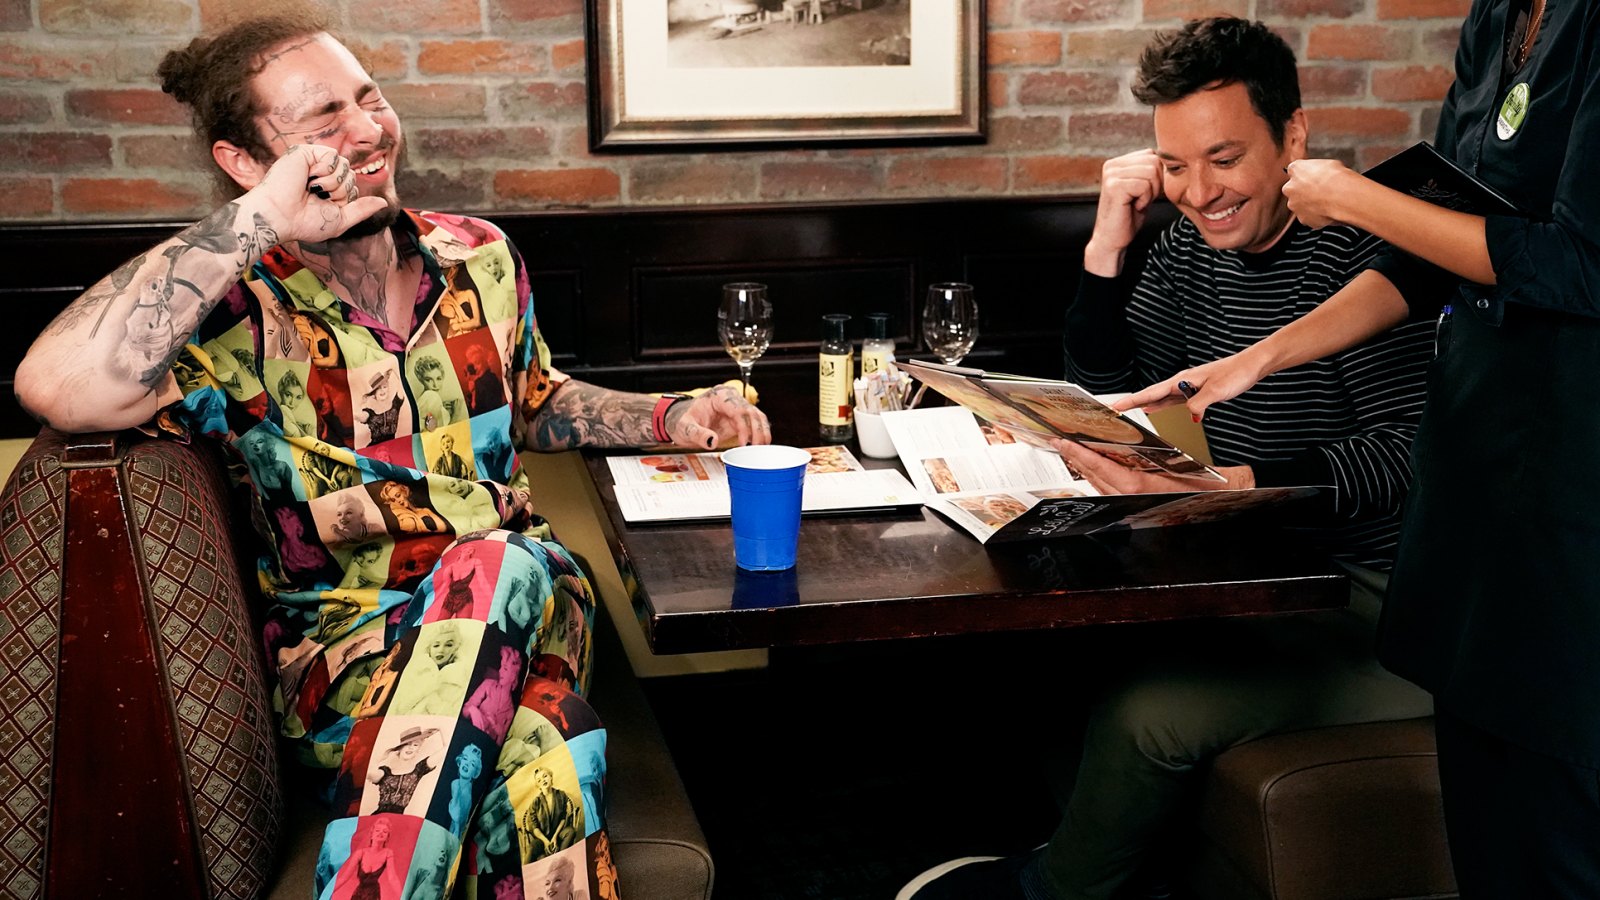 Jimmy Fallon Eats at Olive Garden for the First Time with Post Malone, Twitter Goes Wild